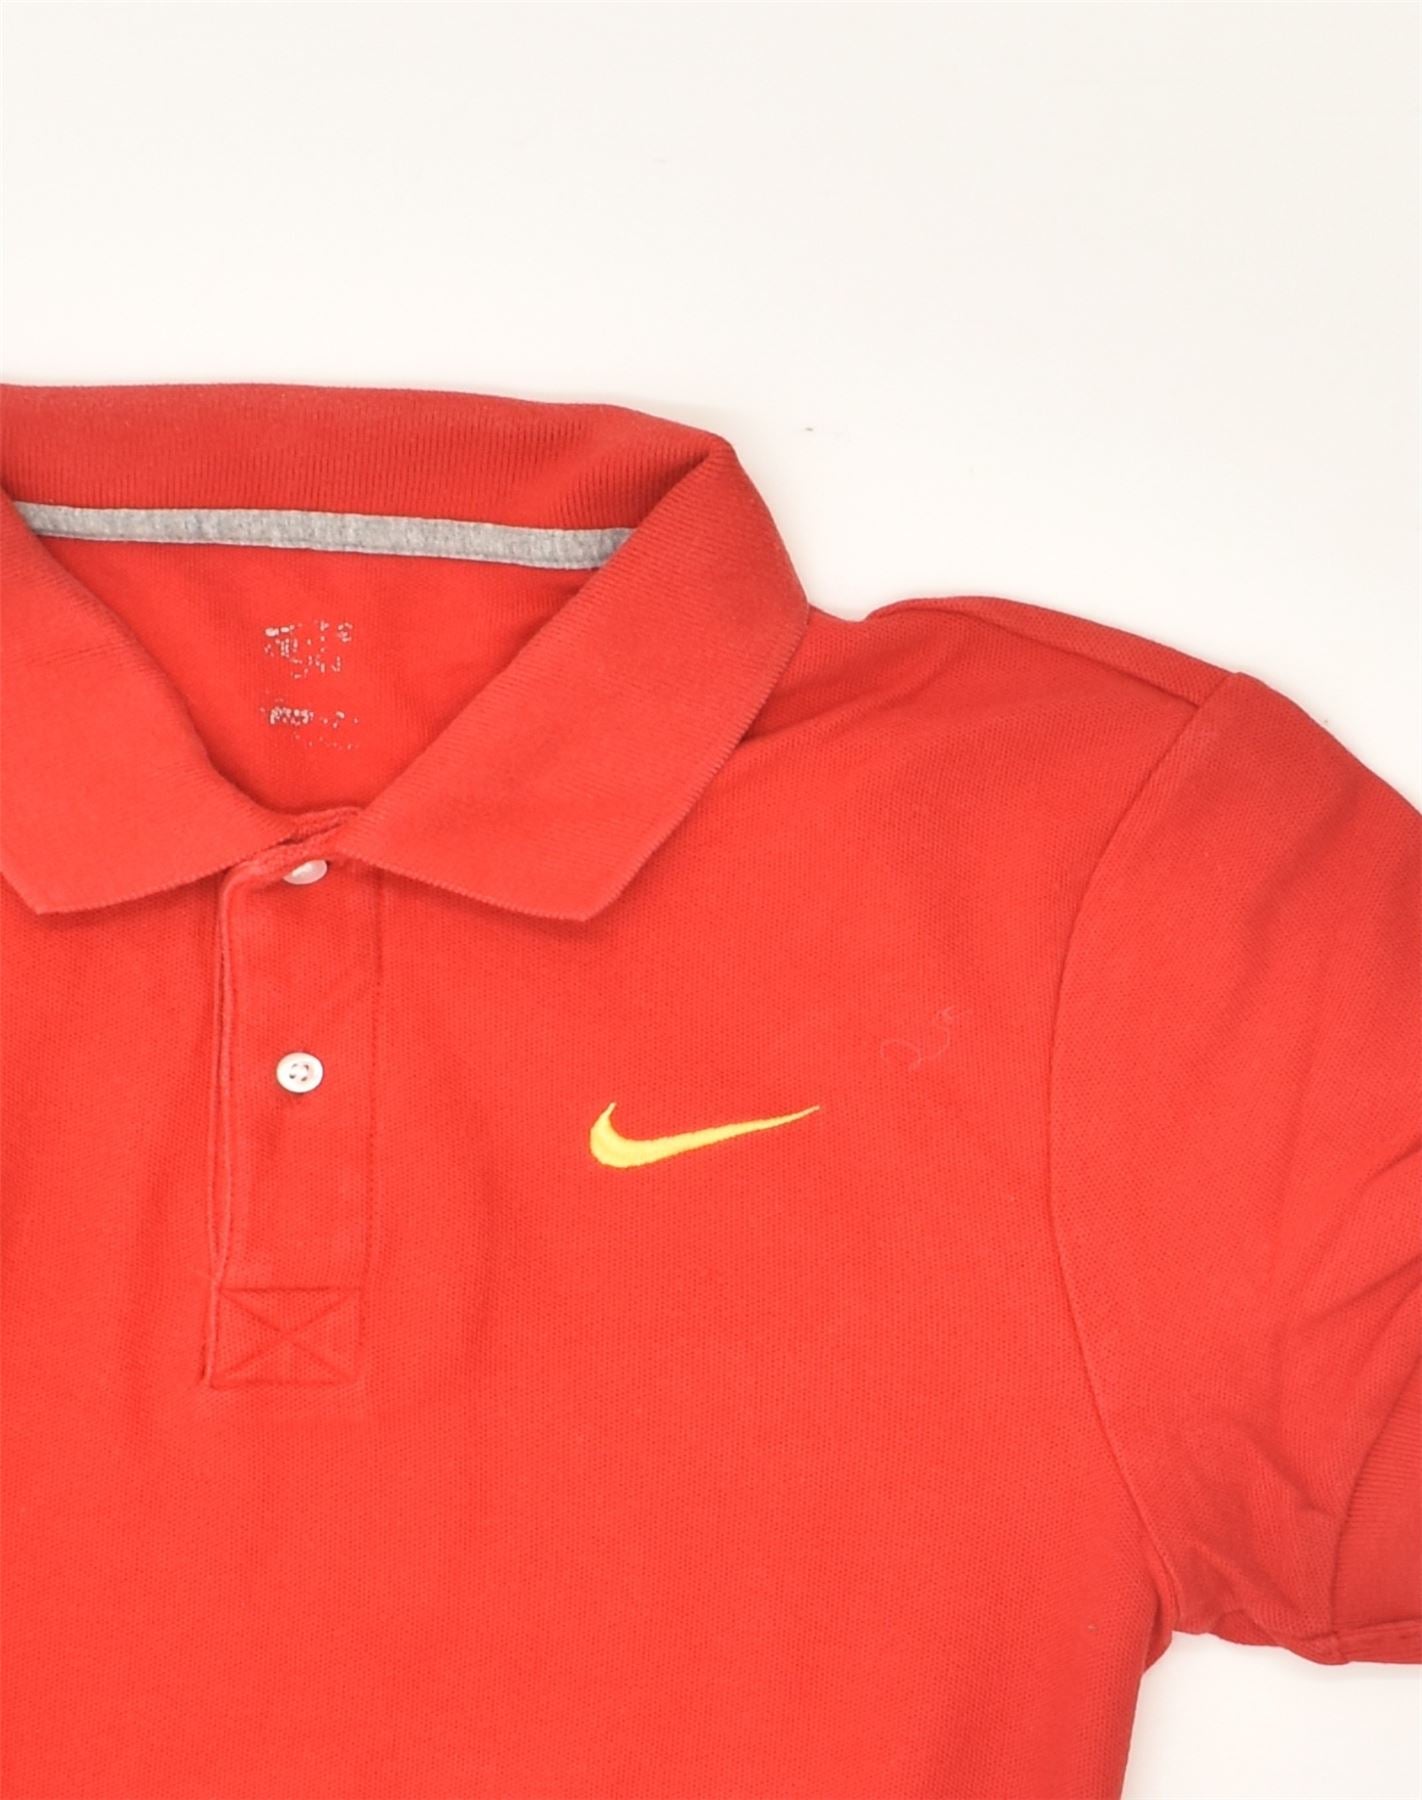 NIKE MENS THE Athletic Dept. Polo Shirt Small Red Cotton TL11